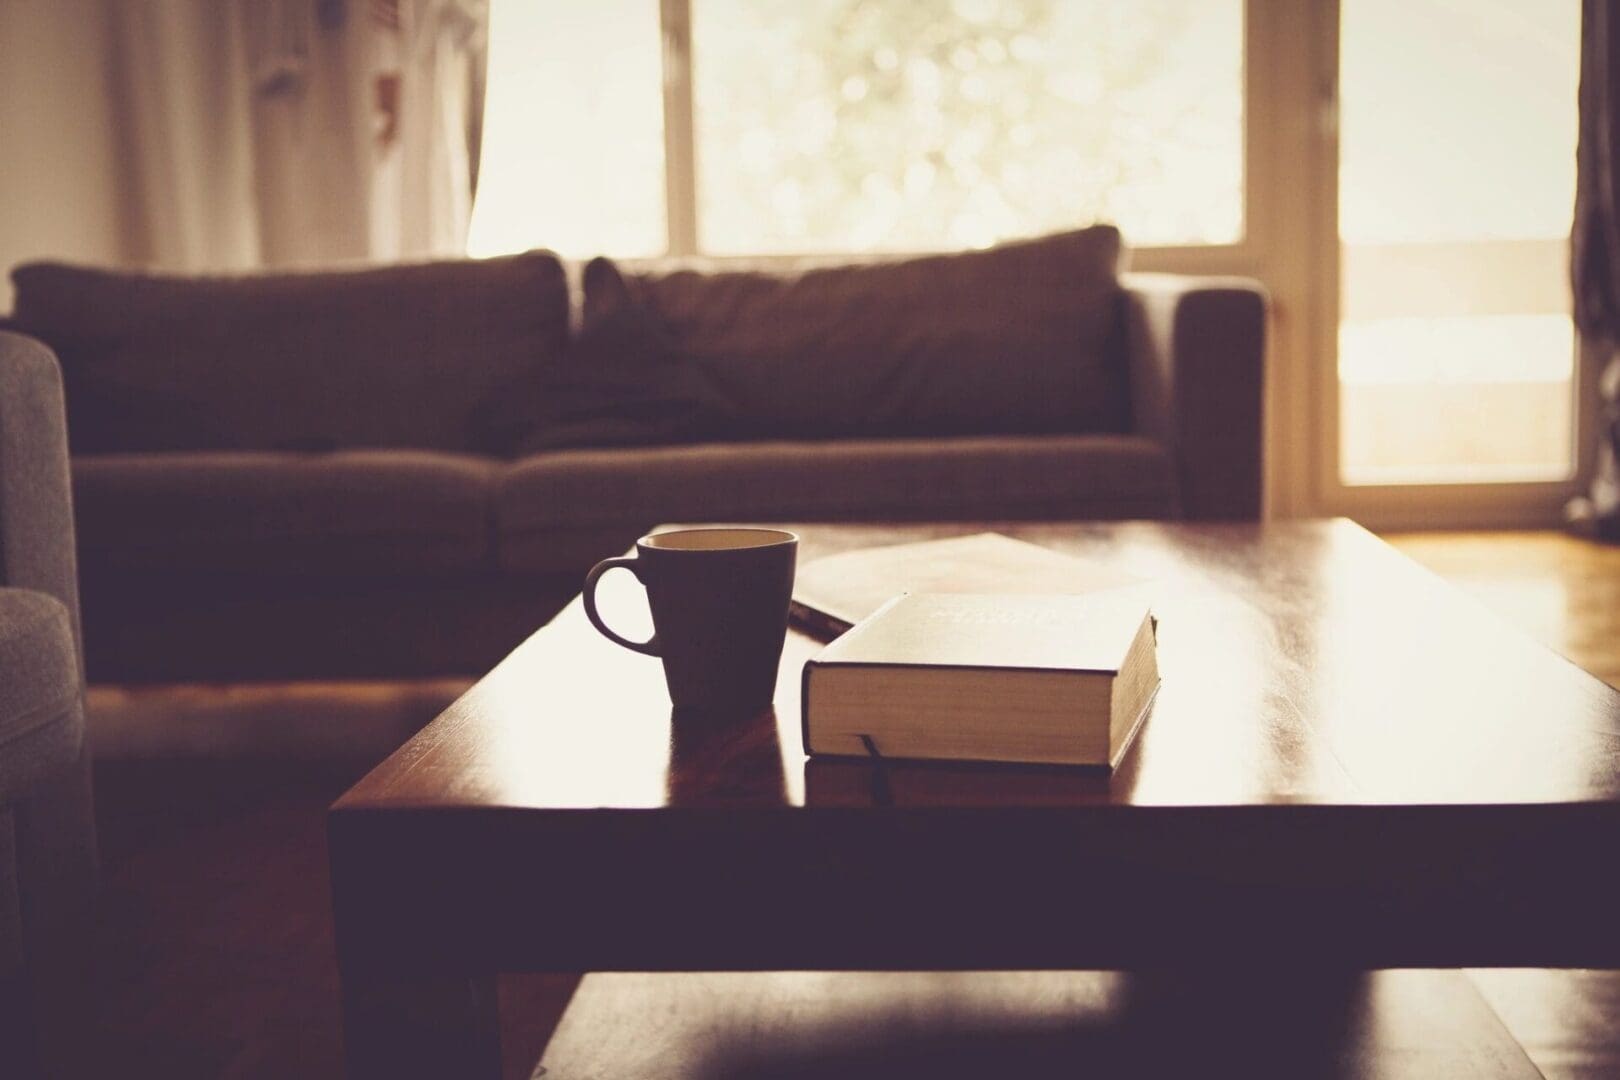 A coffee cup and book on a table in a living room.